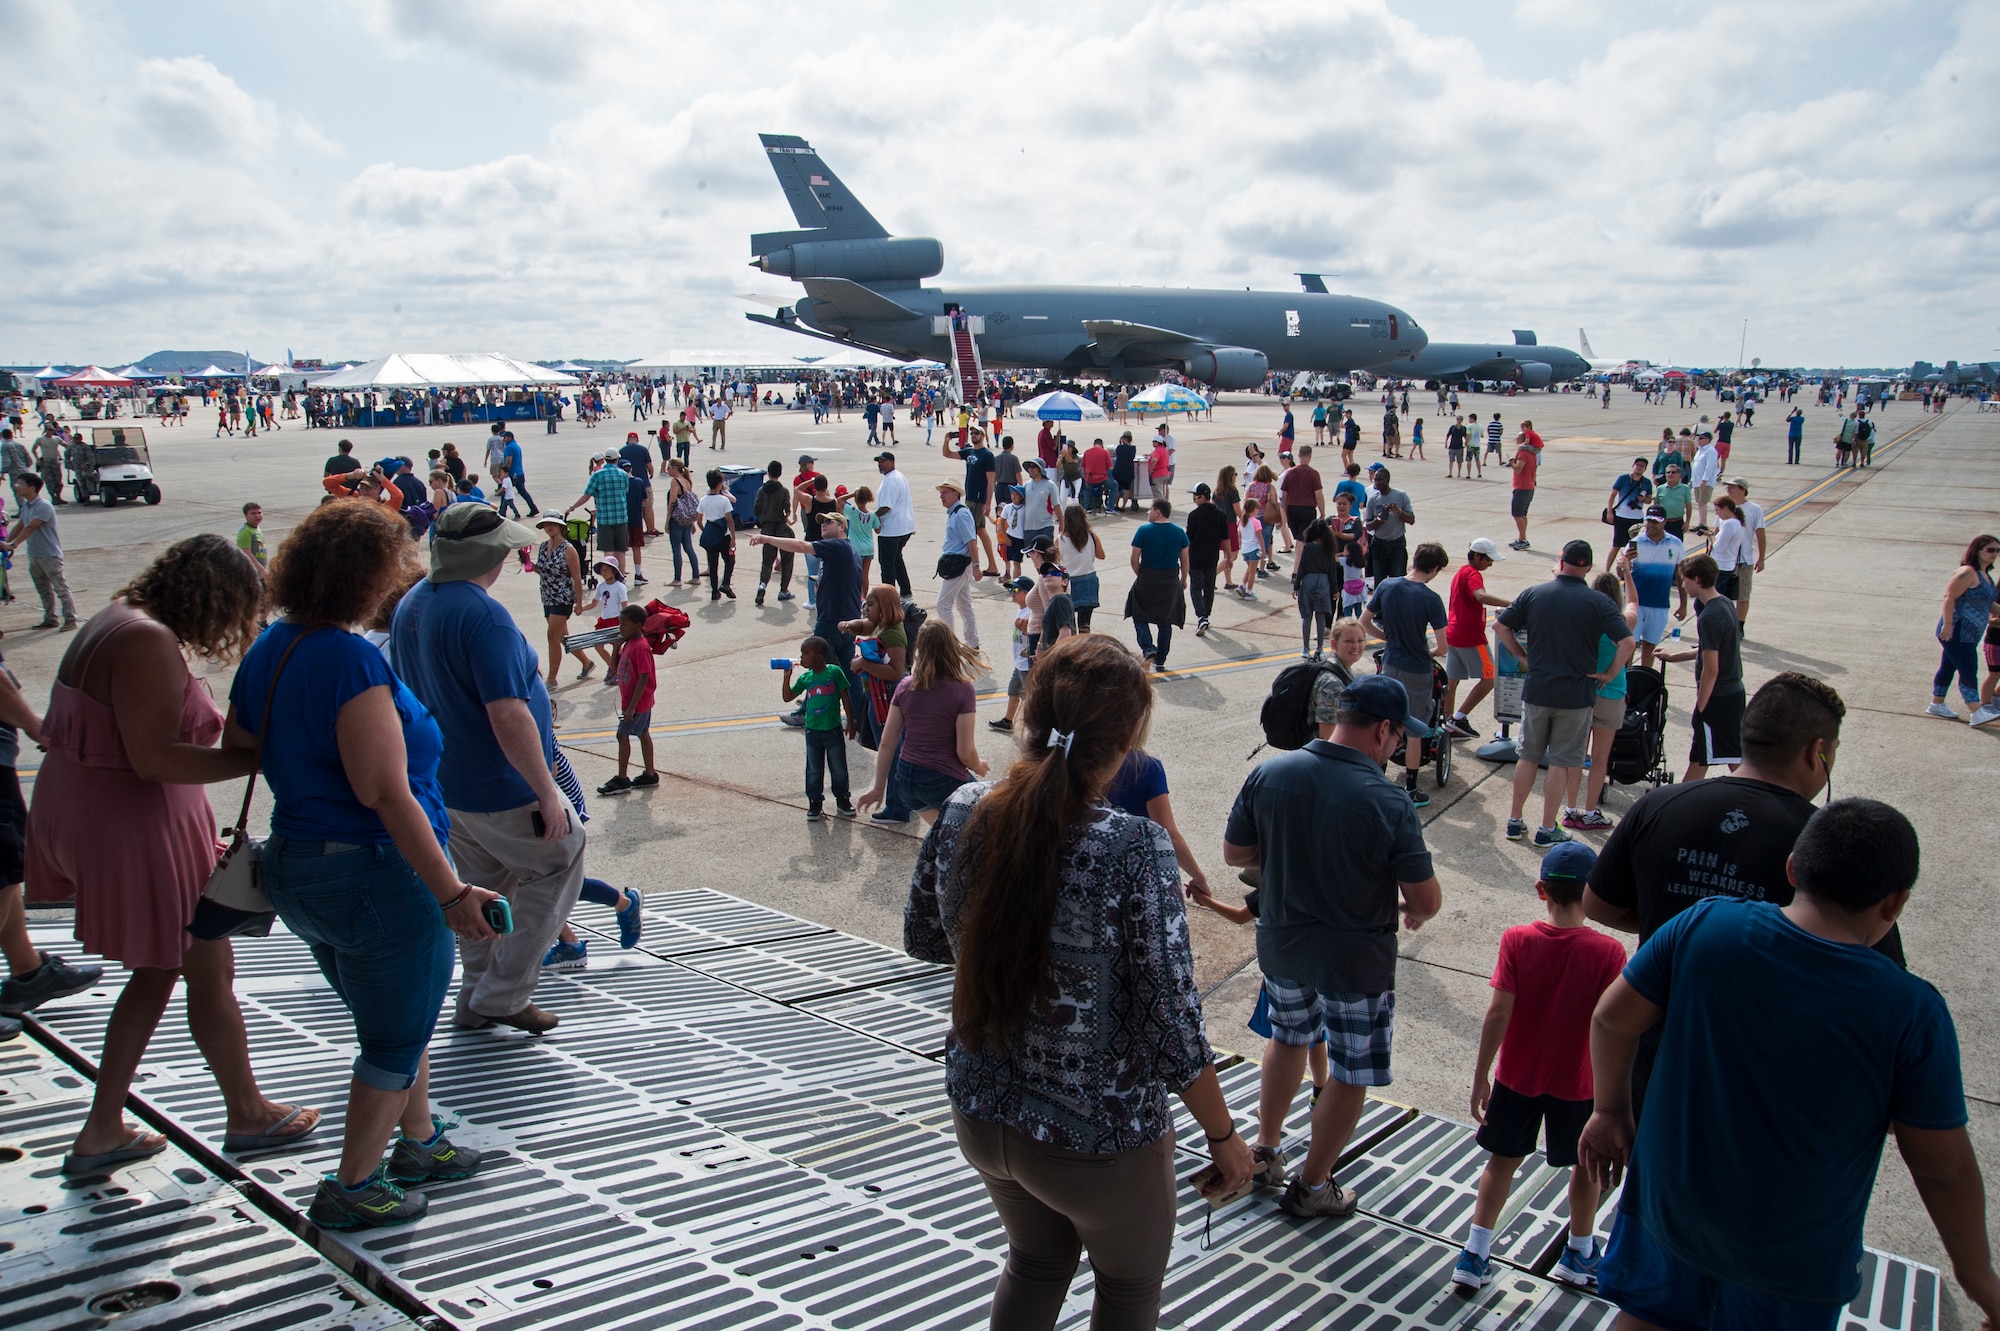 Event attendees walk through the static aircraft displays during the final day of the 2017 Andrews Air Show, Sept. 17, 2017, at Joint Base Andrews, Md.